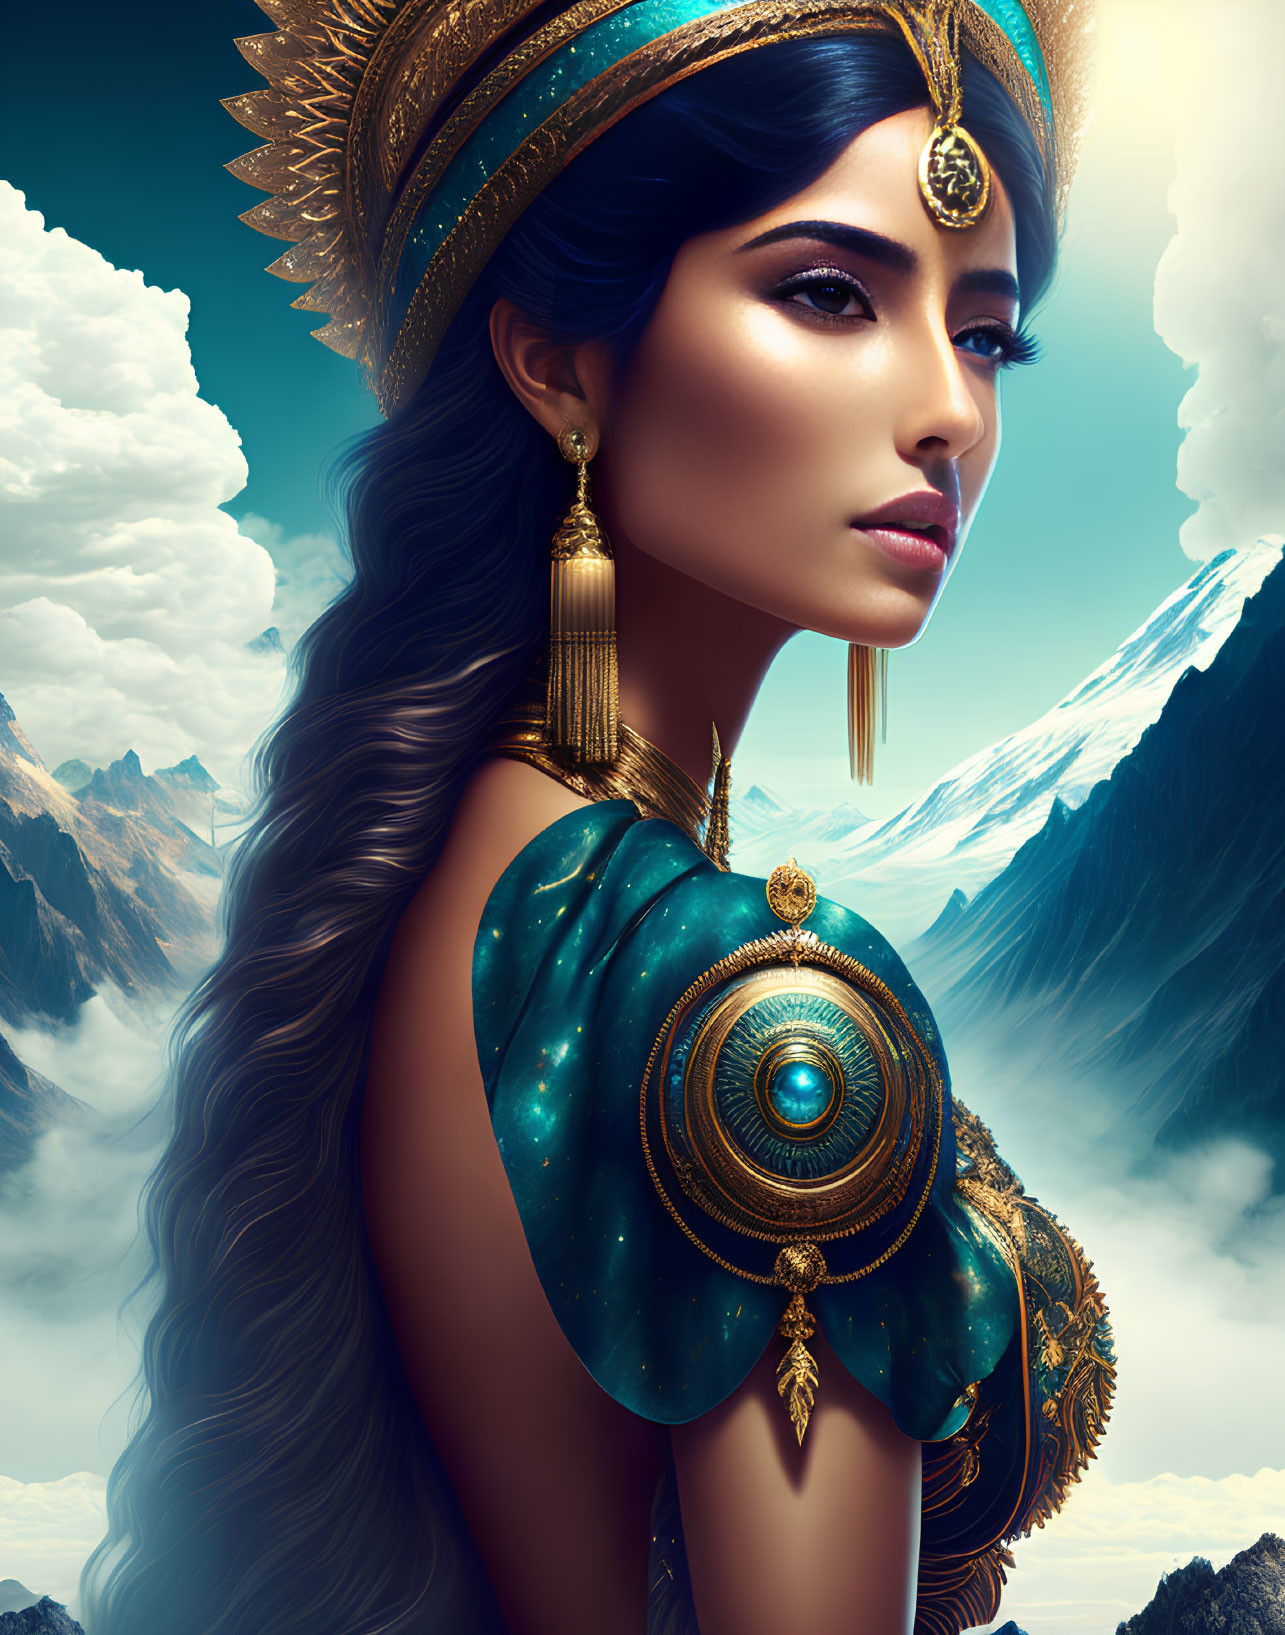 Digital artwork: Woman adorned with gold jewelry and headdress against mountain backdrop